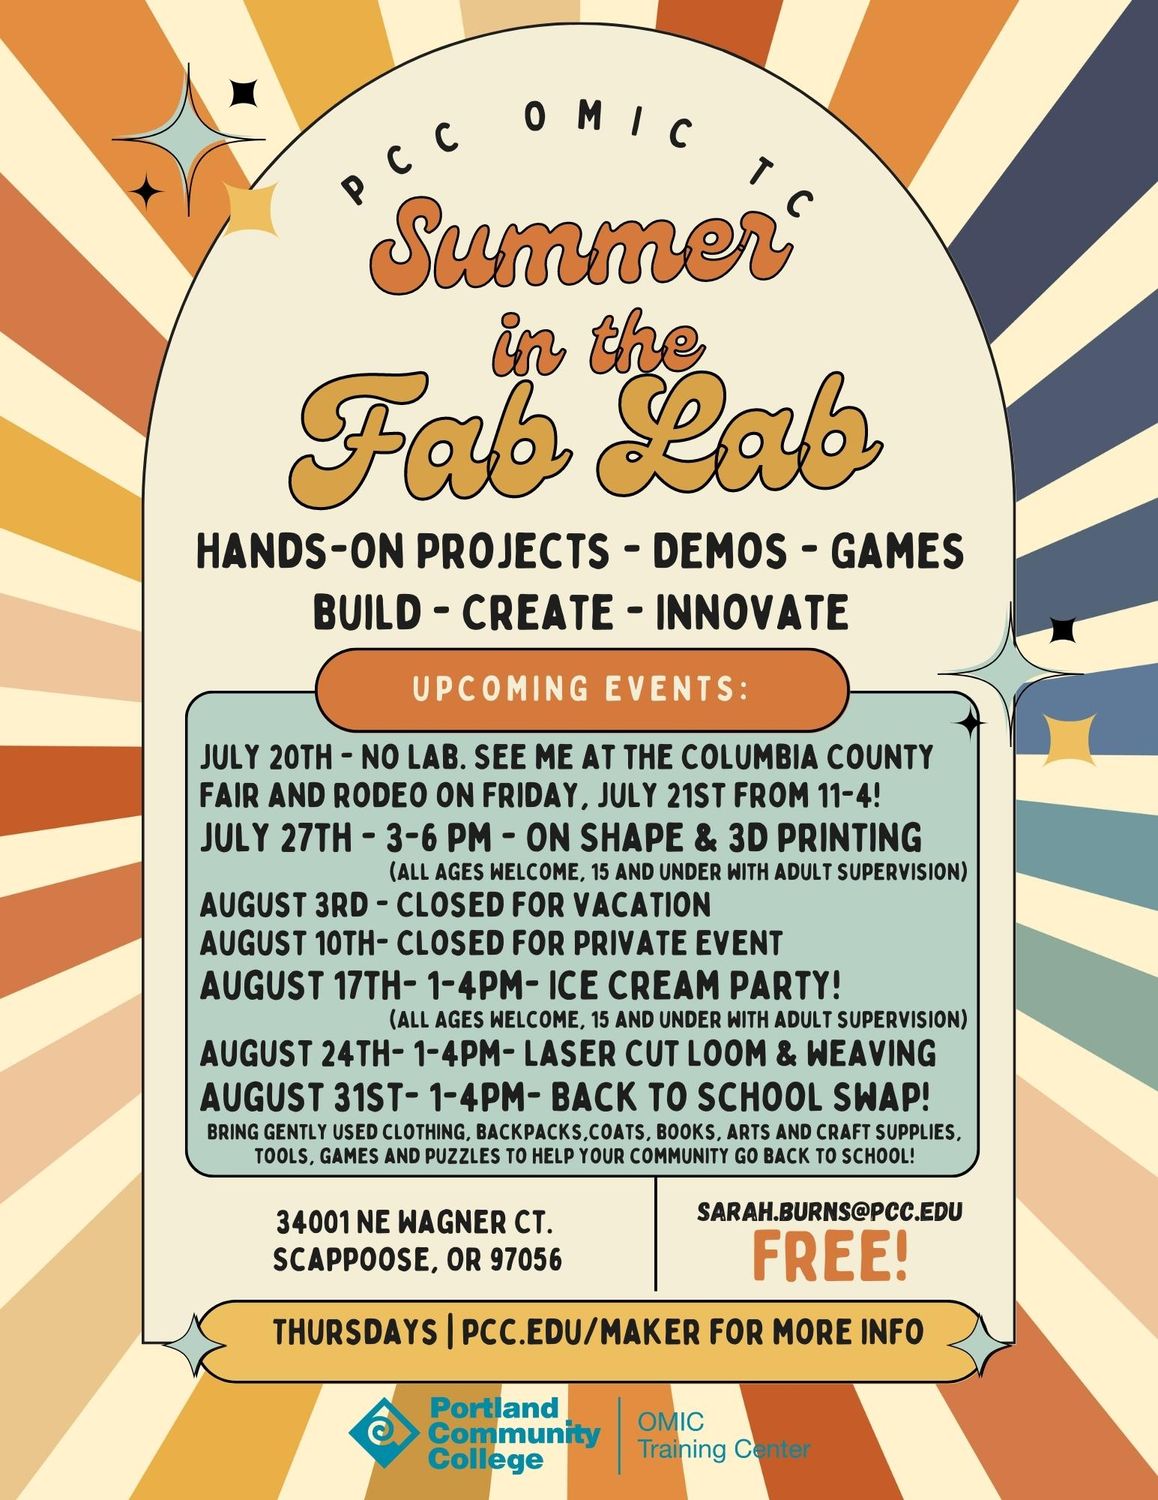 PCC OMIC Training Center Summer in the Fab Lab Hands-on Projects - Demos - Games Build - Create - Innovate Upcoming events: July 20th - No lab. See me at the Columbia County Fair and Rodeo on Friday, July 21st from 11 AM - 4 PM! July 27th - 3-6 PM - On Shape & 3d Printing (All ages welcome, 15 and under with adult supervision) August 3rd - Closed for Vacation August 10th- Closed for Private Event August 17th- 1-4pm- Ice Cream Party! (All ages welcome, 15 and under with adult supervision) August 24 Th- 1-4pm- Laser Cut Loom & Weaving August 31st- 1-4pm- Back to School Swap! Bring Gently Used Clothing, Backpacks, Coats, Books, Arts & Craft Supplies, Tools, Games And Puzzles to help your community go back to school! 34001 Ne Wagner Ct. Scappoose, Or 97056 Sarah.burns@pcc.edu Thursdays | Https://pcc.edu/maker For More Info